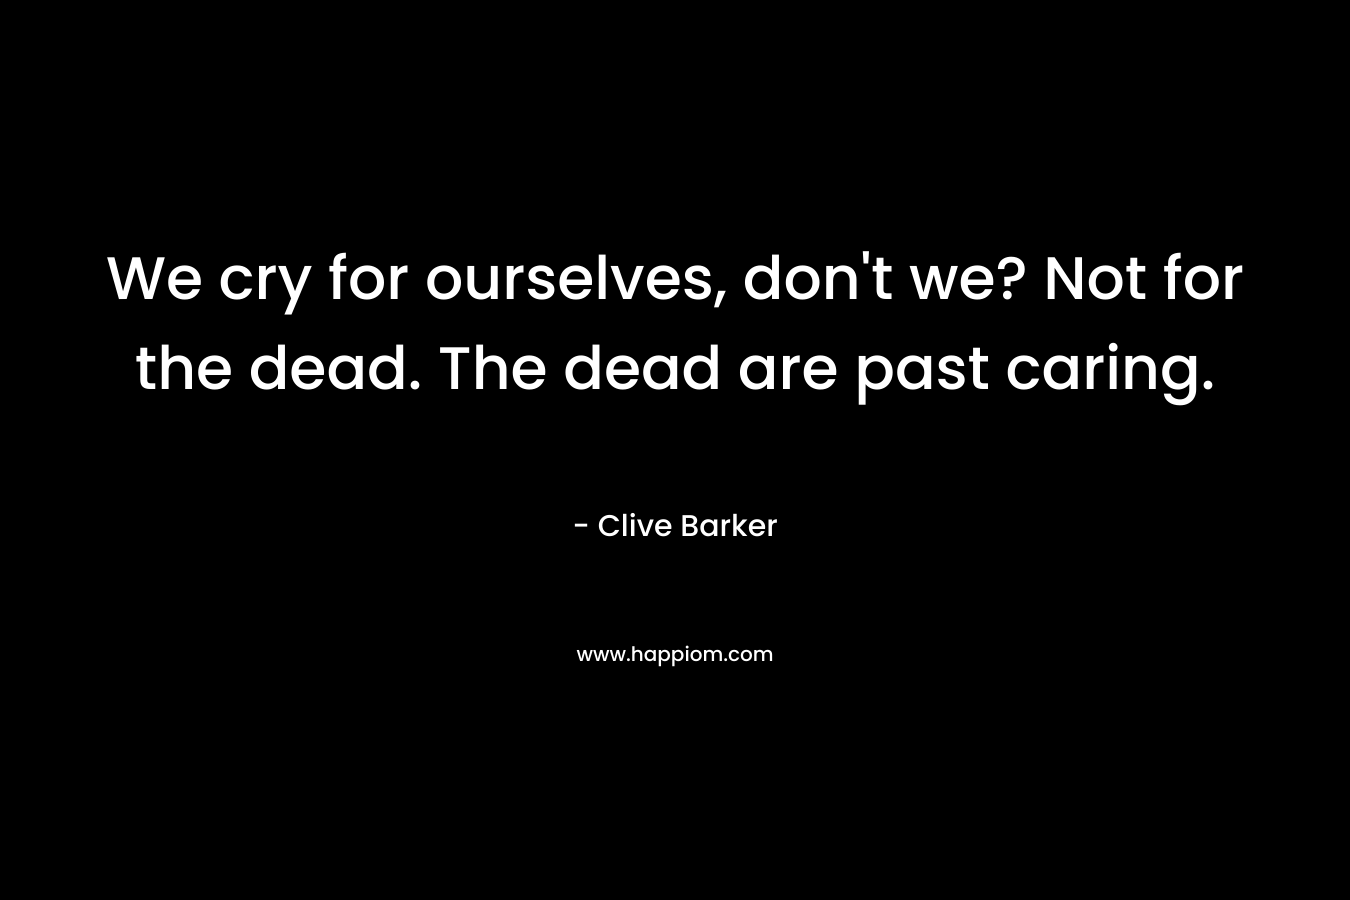 We cry for ourselves, don’t we? Not for the dead. The dead are past caring. – Clive Barker